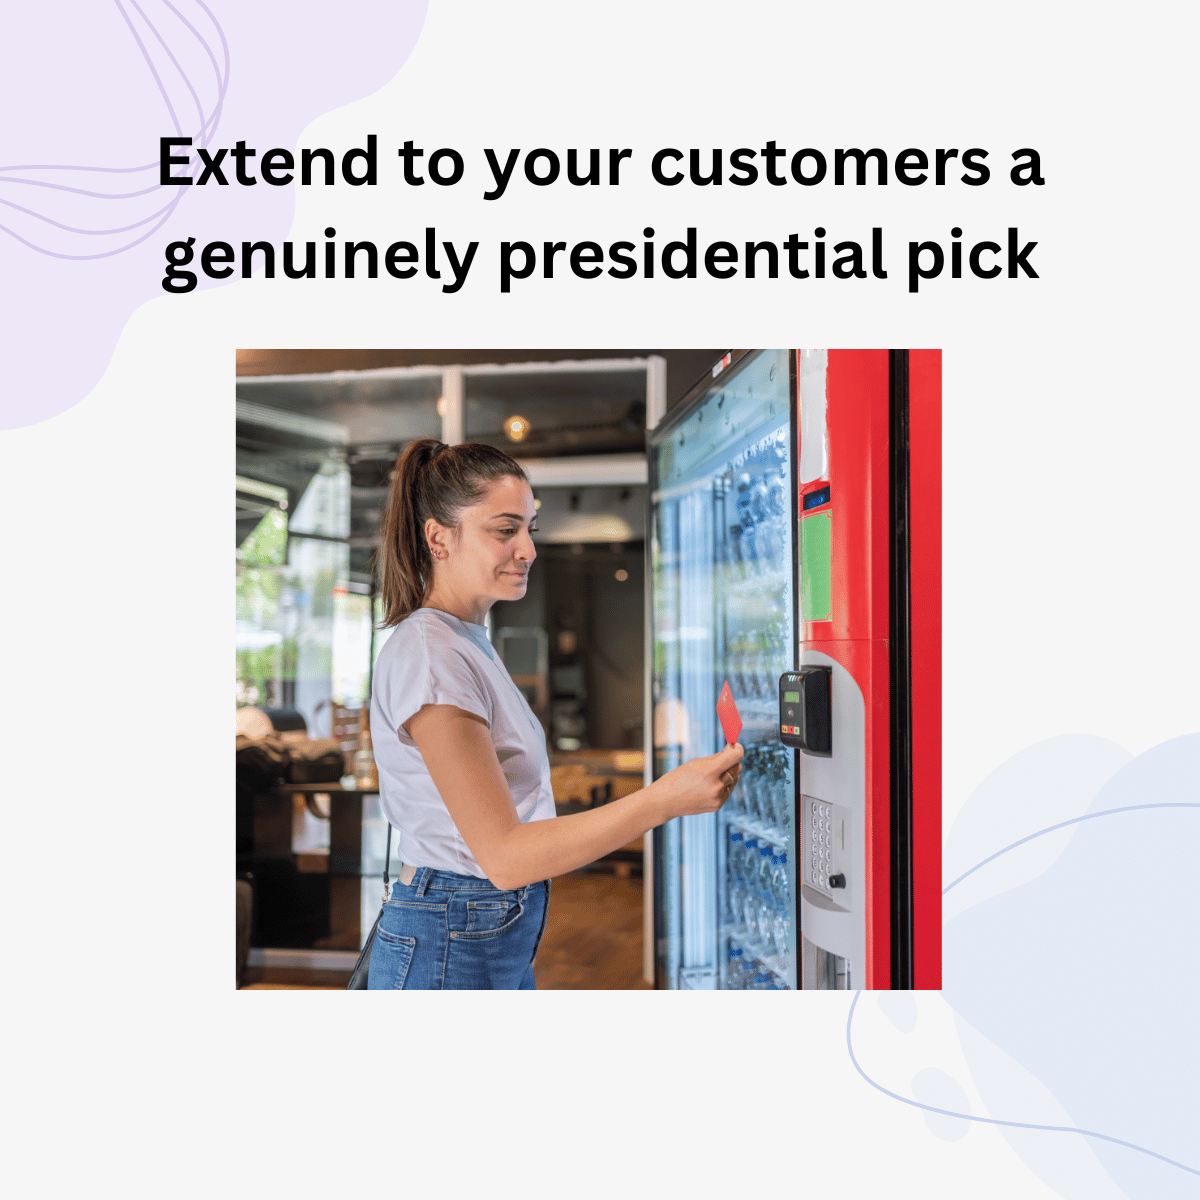 GIVE YOUR CUSTOMERS A TRULY PRESIDENTIAL SELECTION